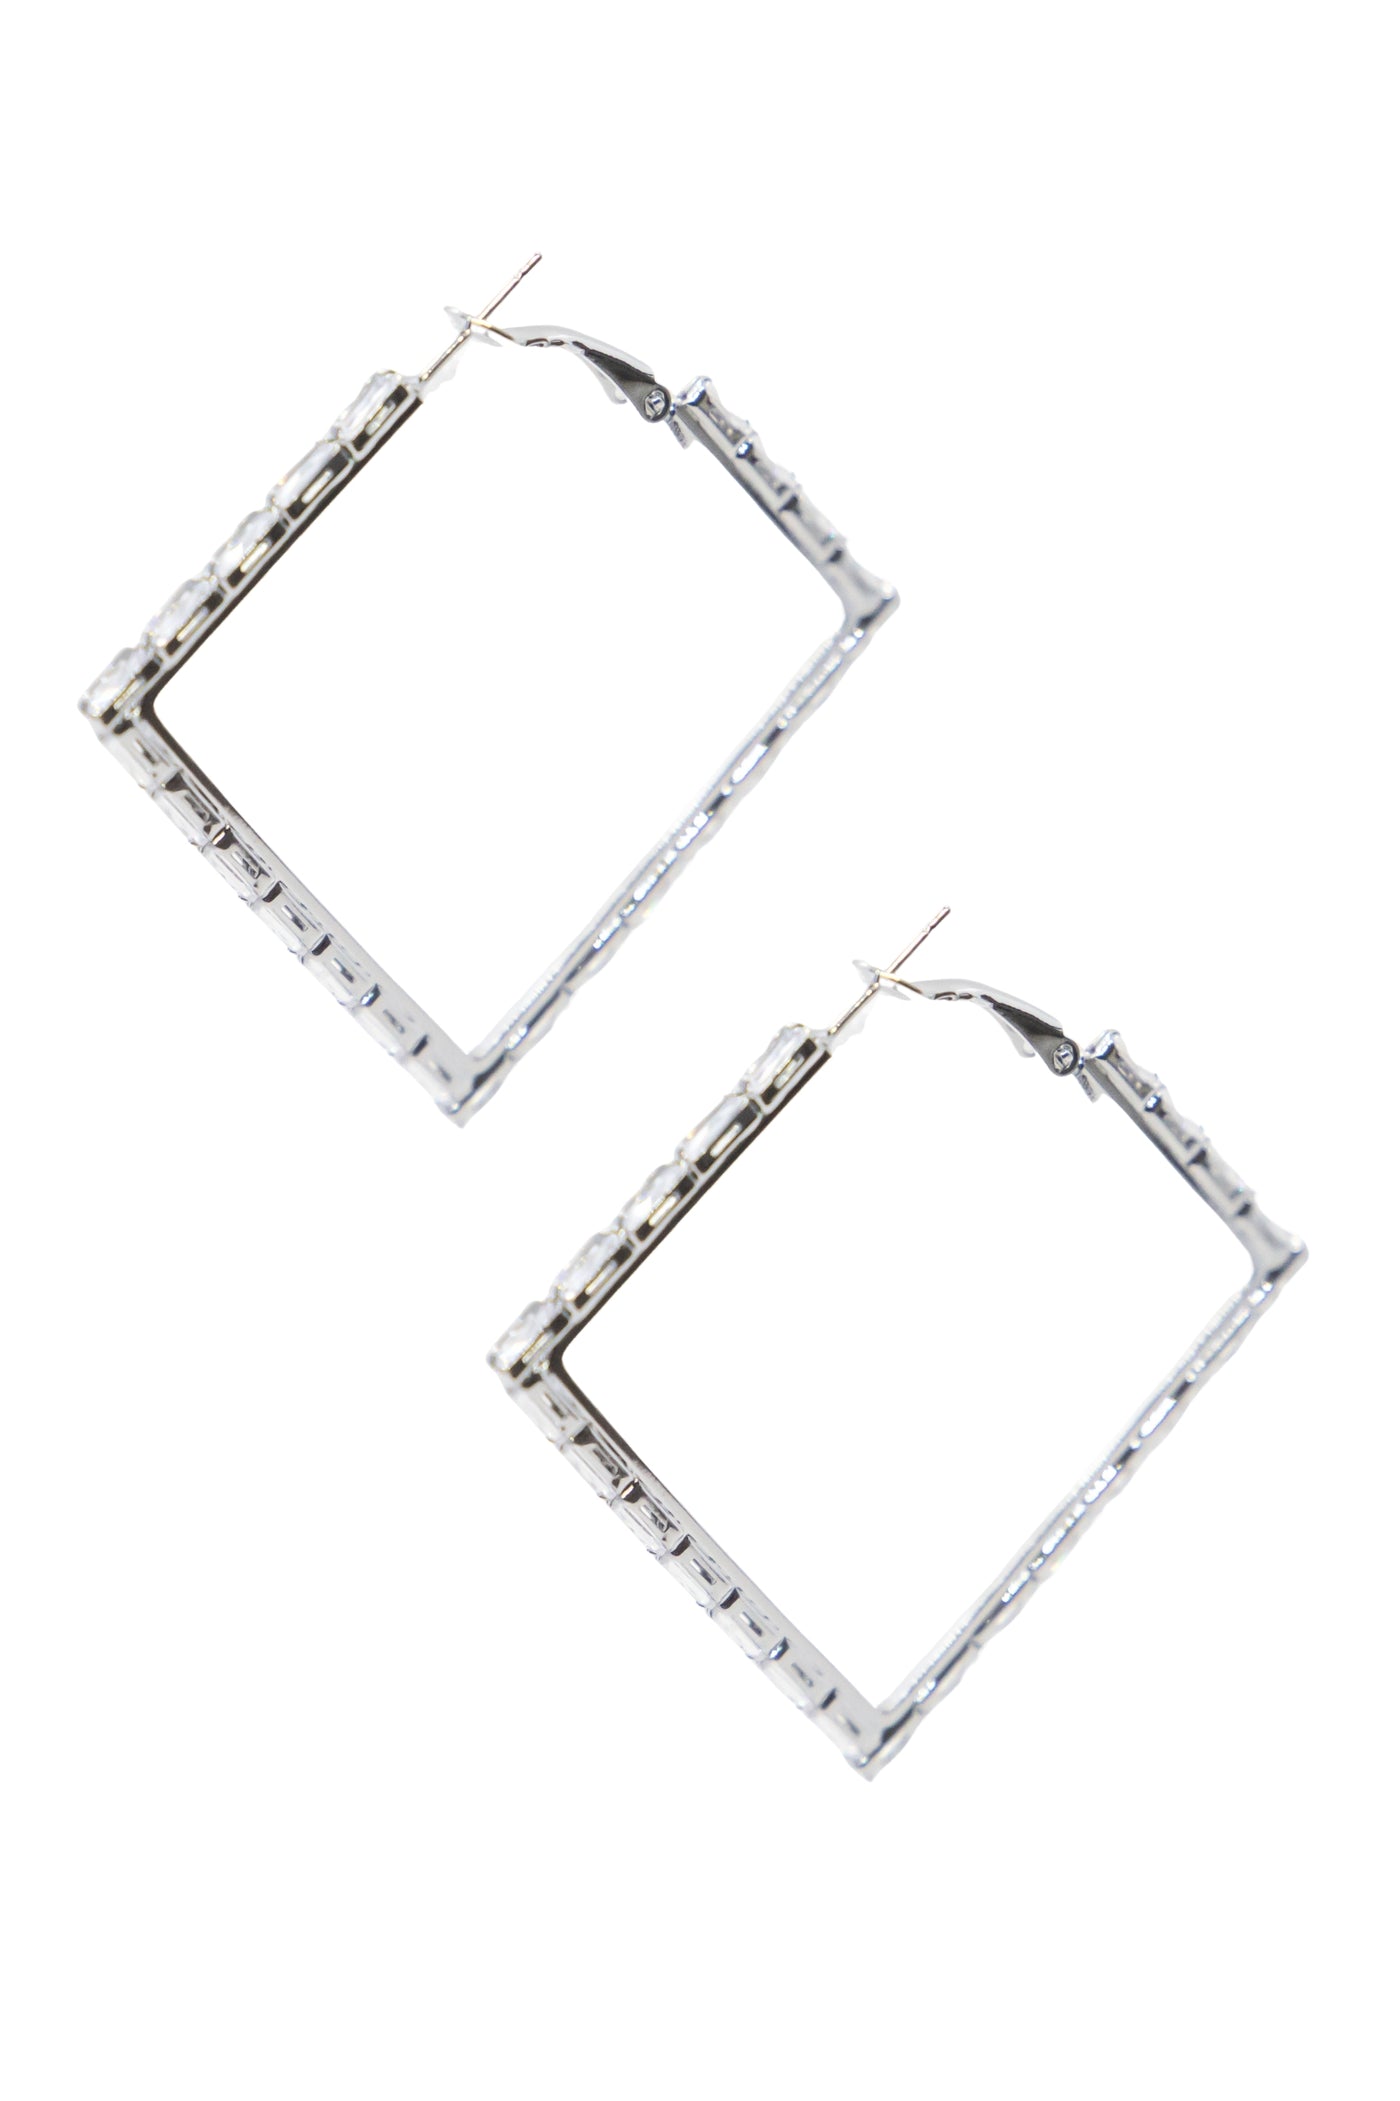 Large Silver and Crystal square Hoops Earrings